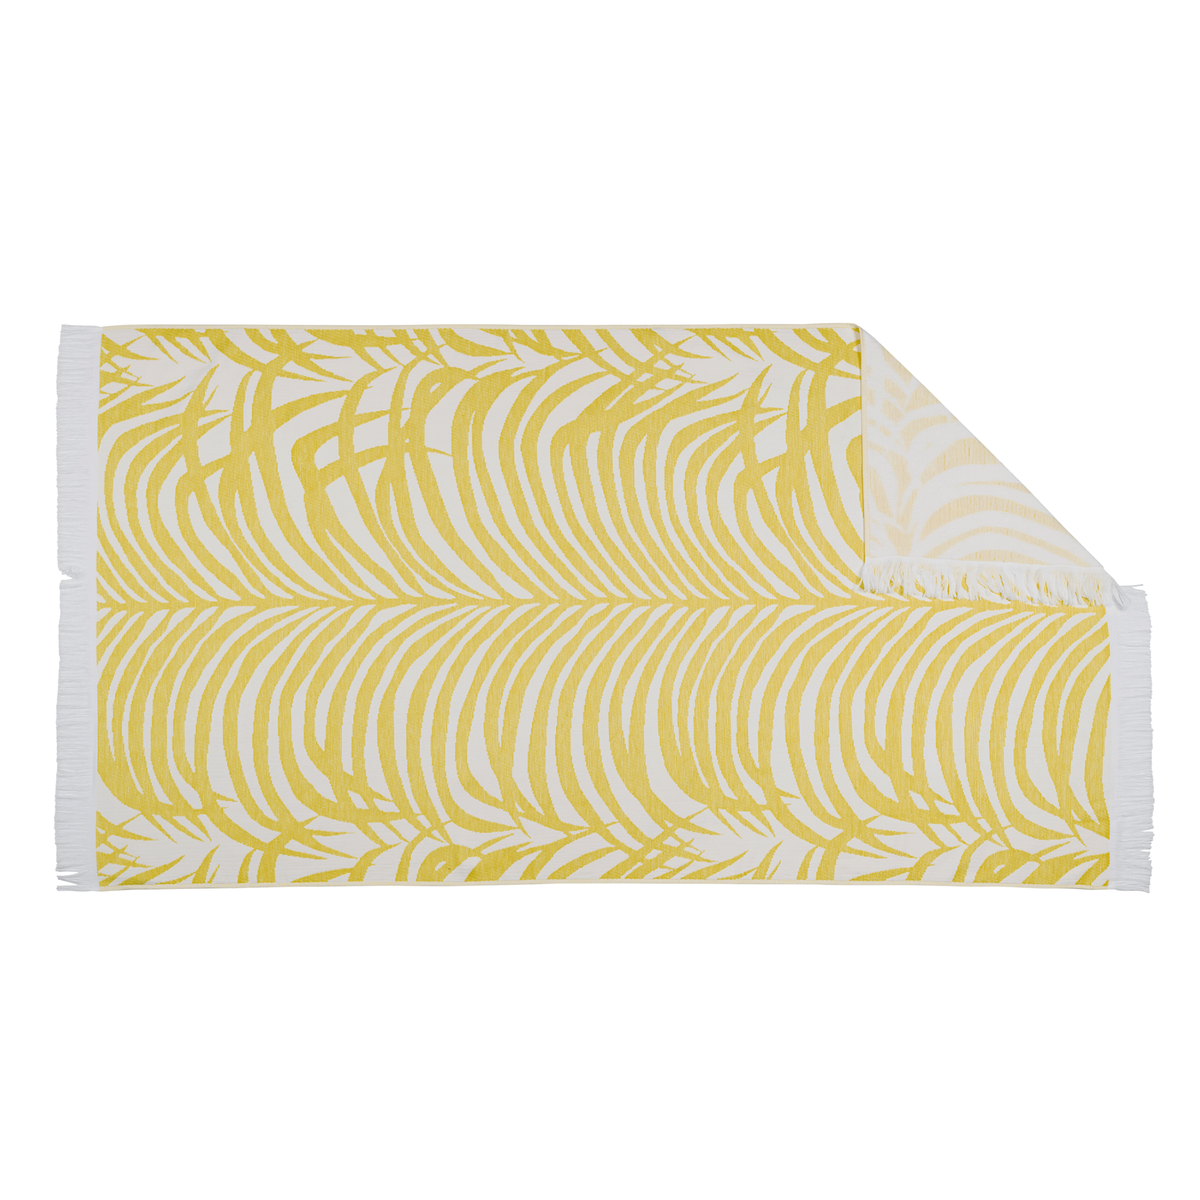 Silo Image of Matouk Zebra Palm Beach Towels in Color Canary